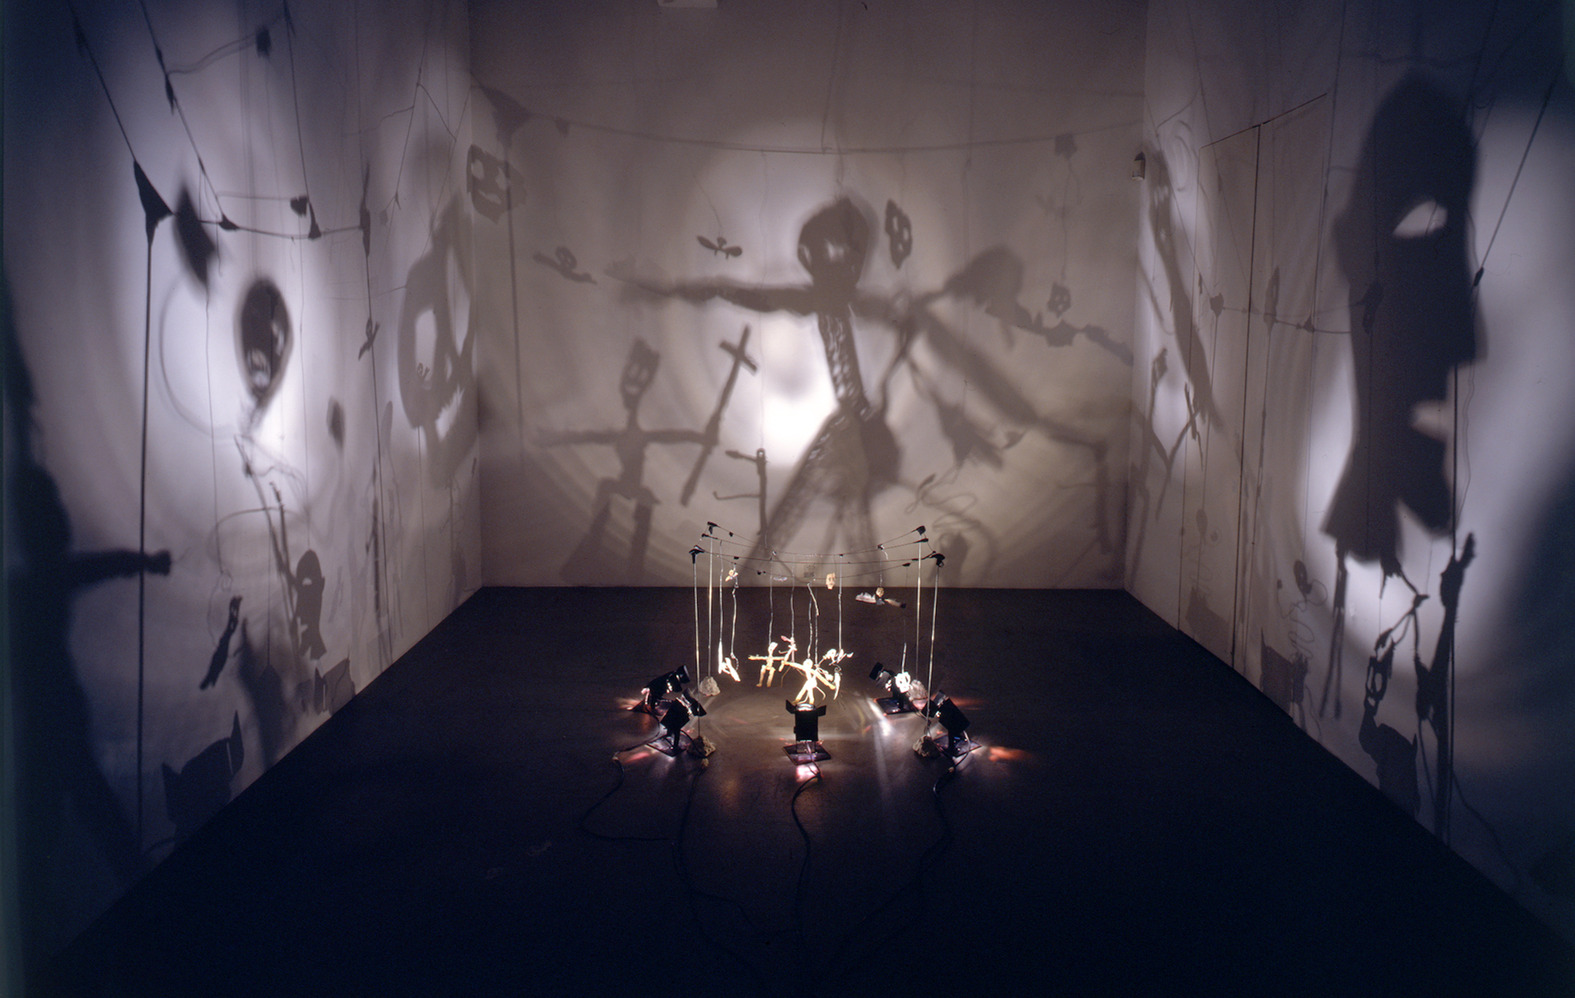 Theater of Shadows, 1984. Photo: André Morain Courtesy the artist and Marian Goodman Gallery